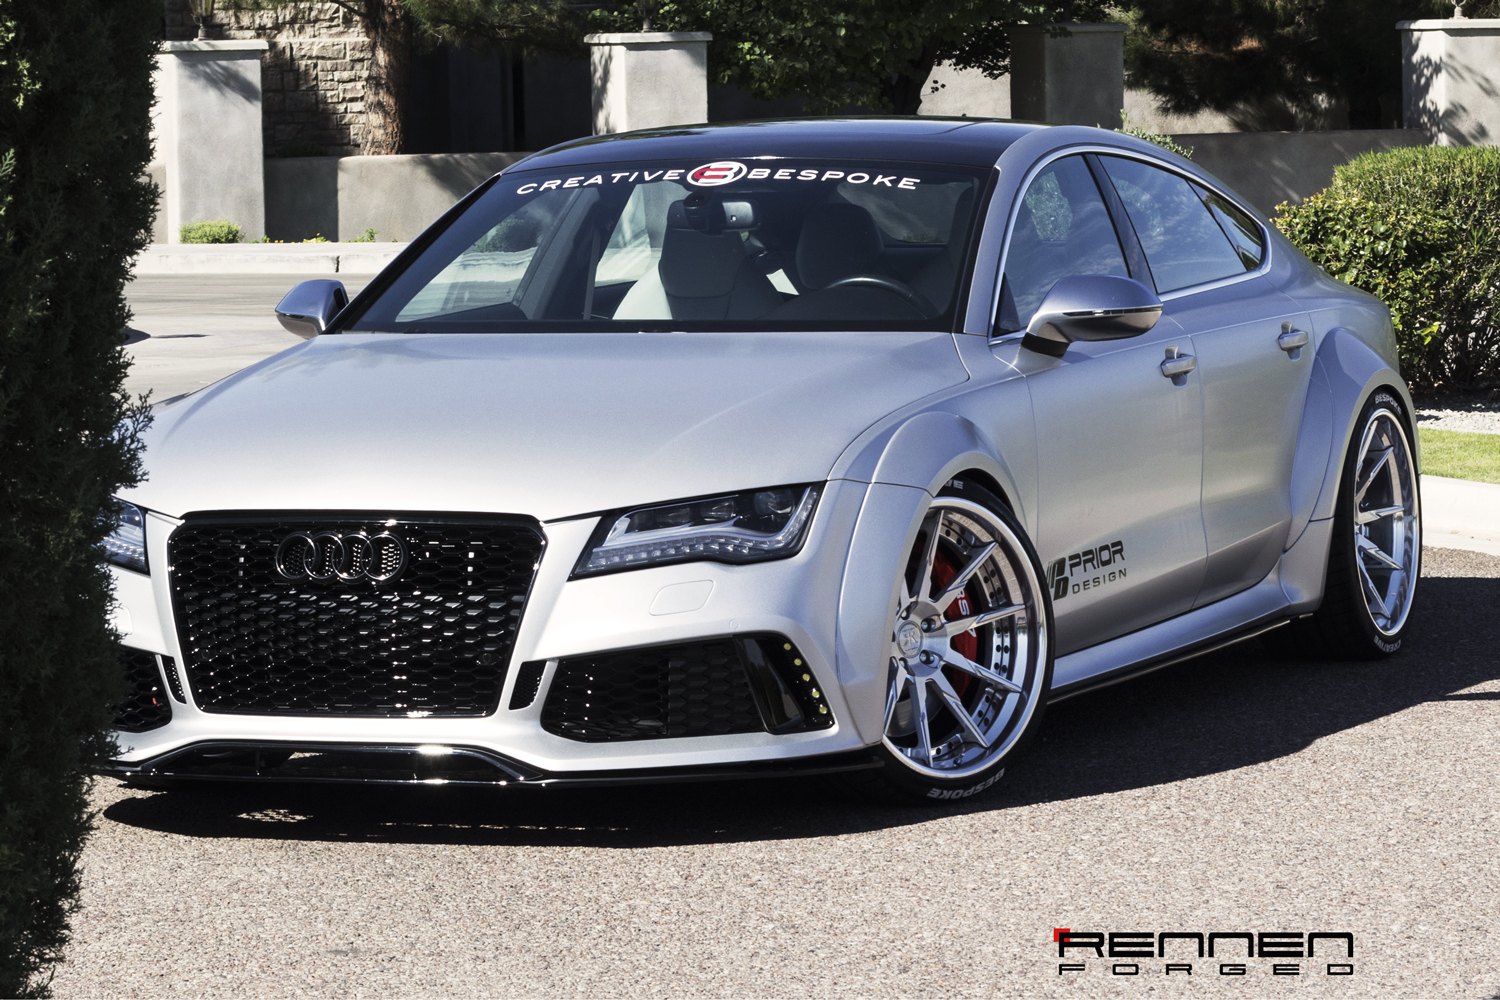 Silver Audi A7 with Aftermarket Front Bumper - Photo by Rennen International